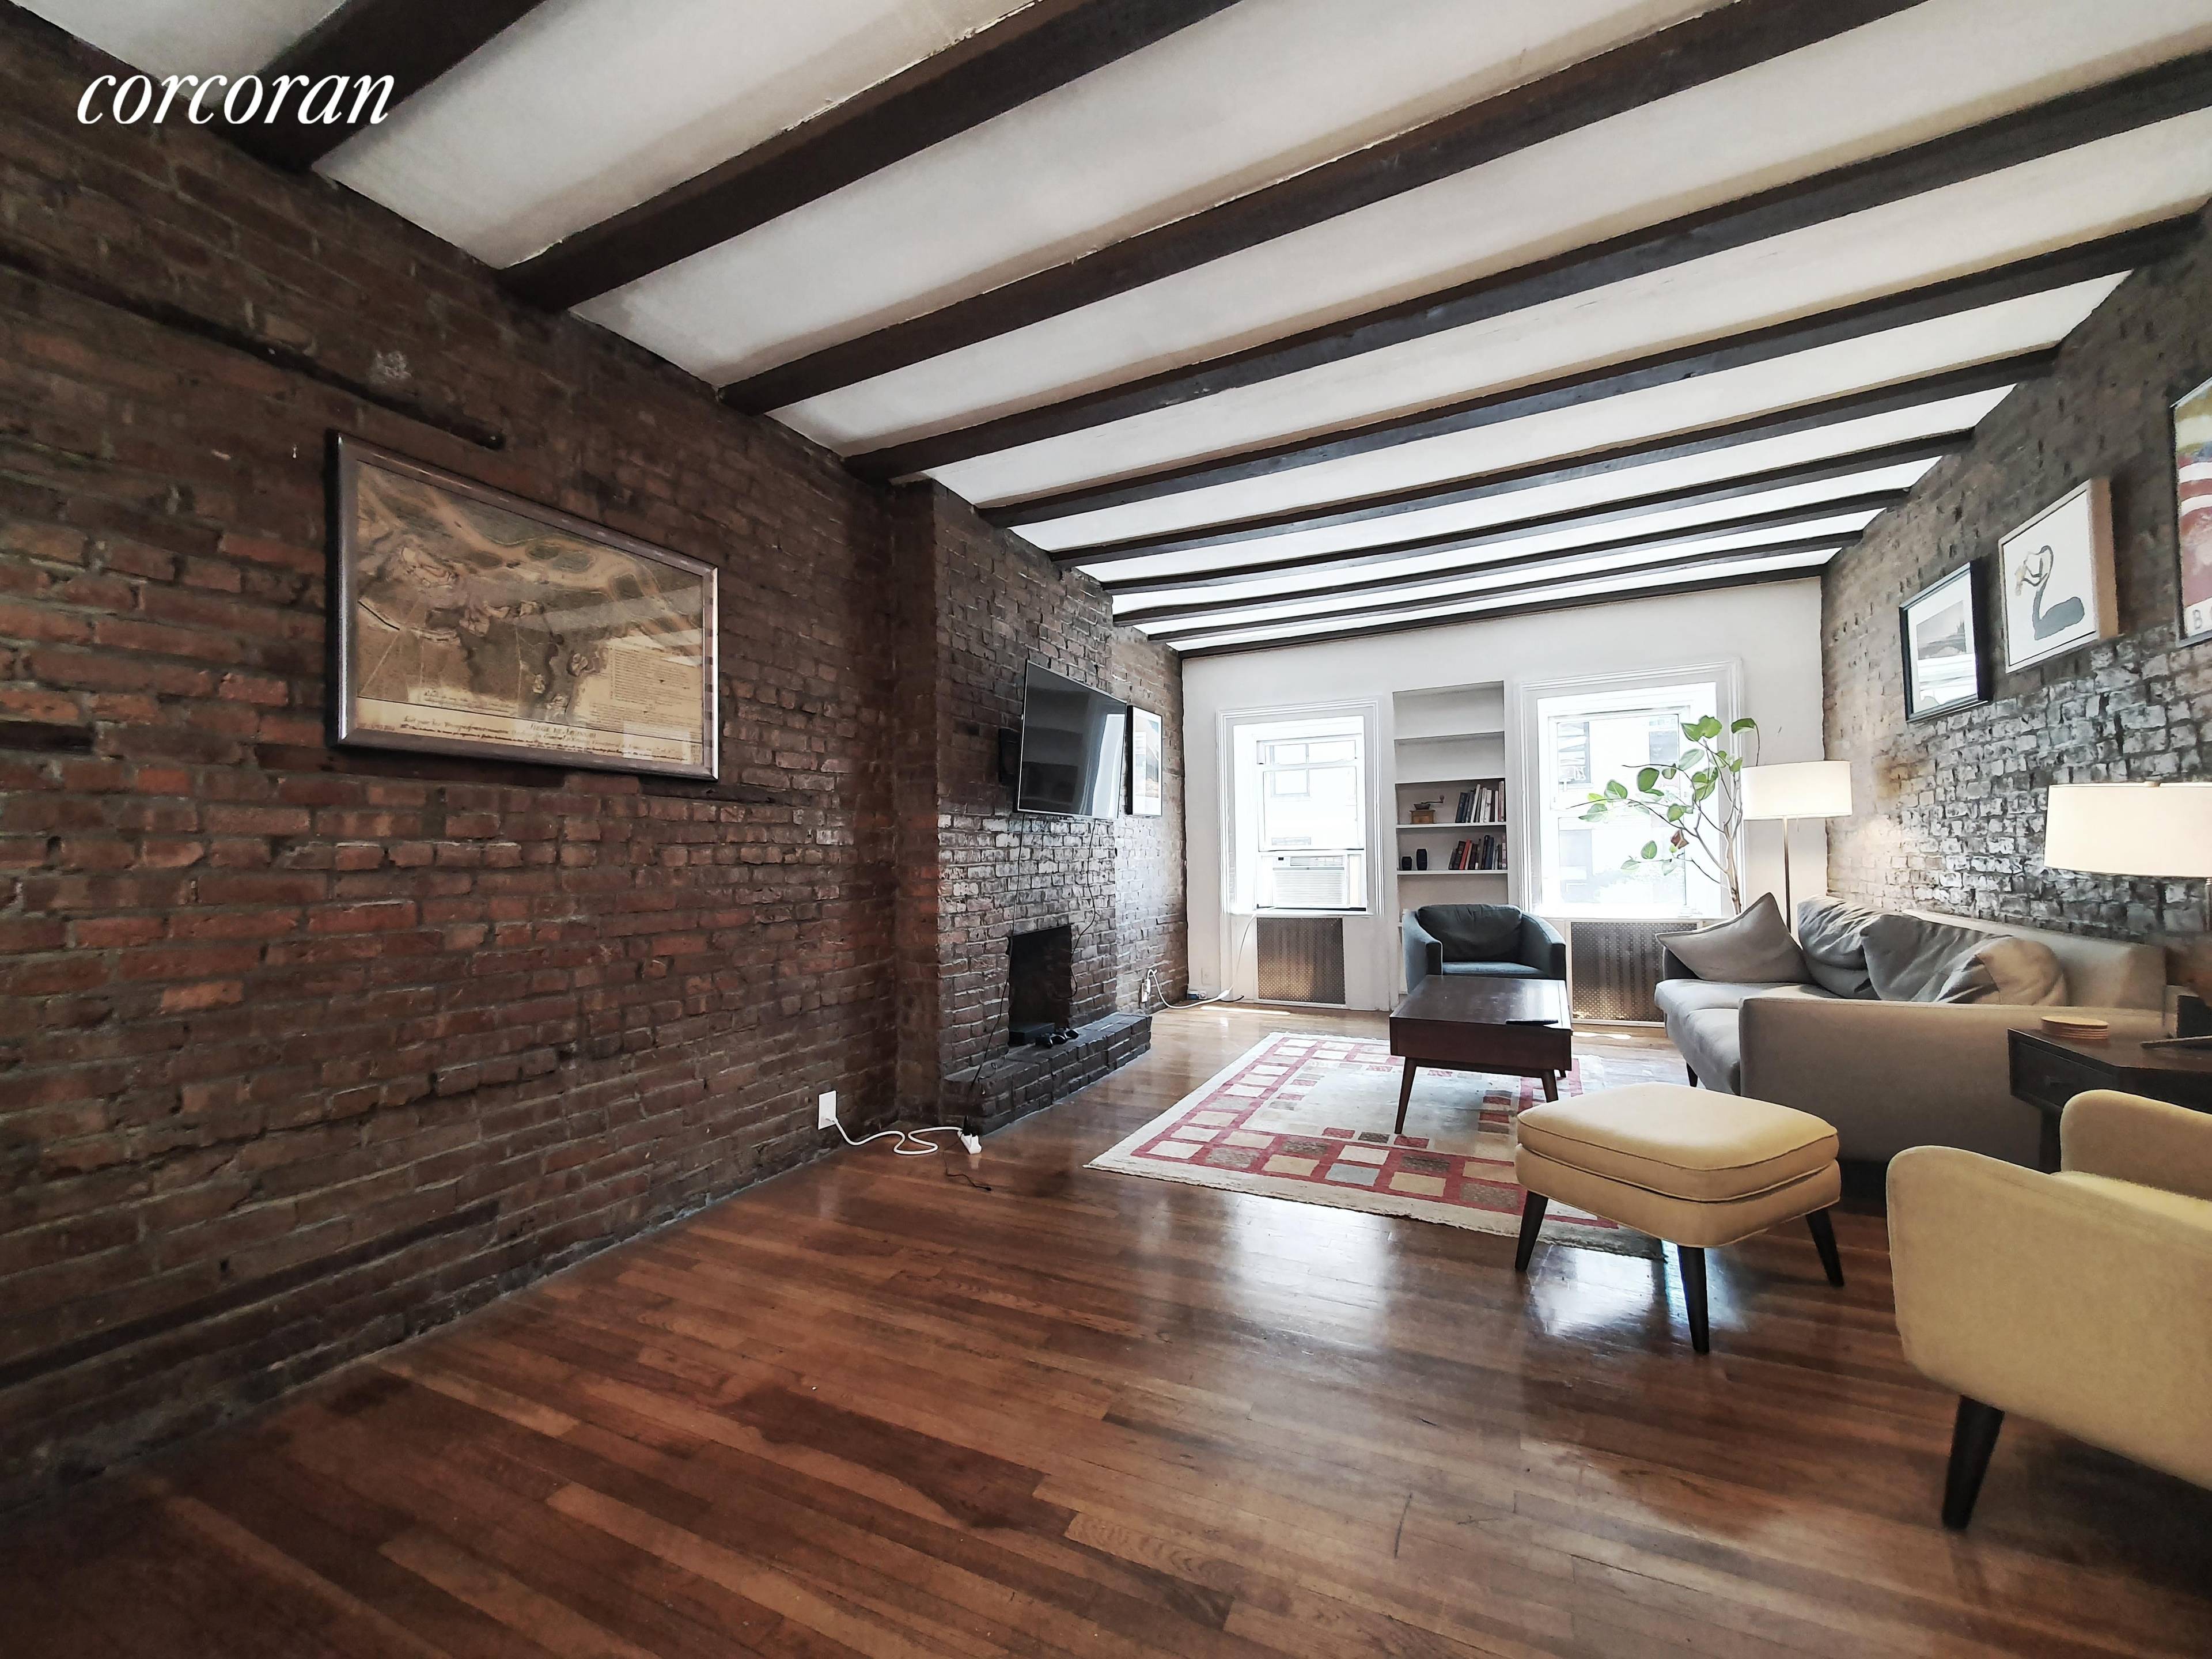 Delightful Duplex situated in one of the quietest tree lined block in Chelsea.